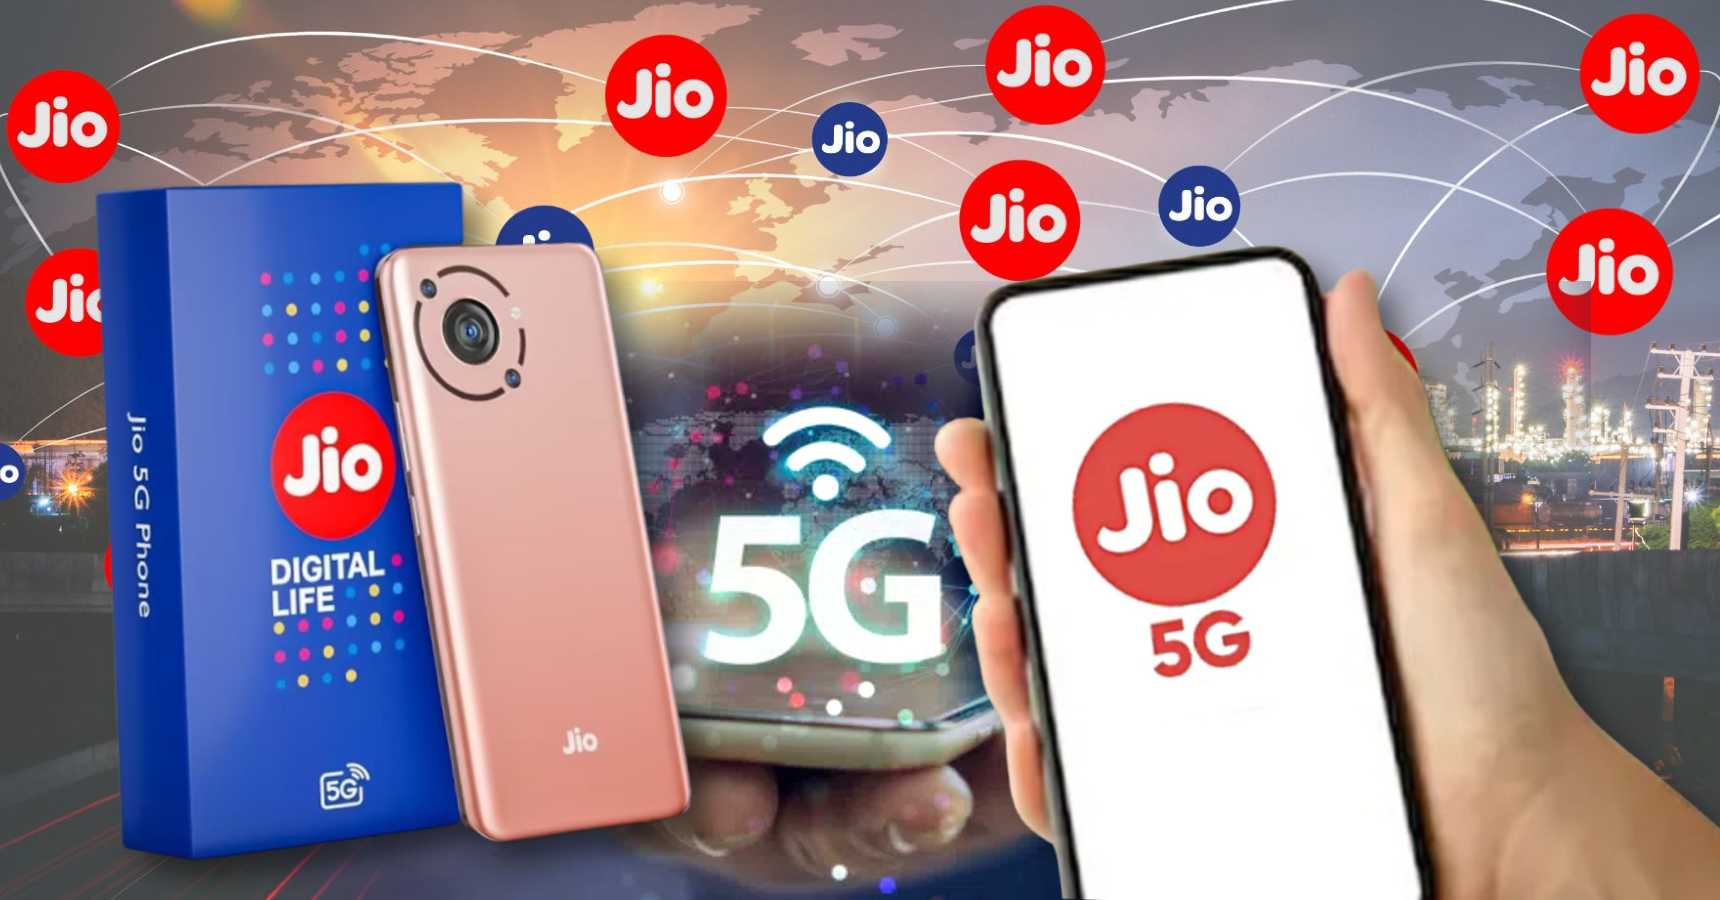 Reliance Jio 5g Smartphone might come with these features